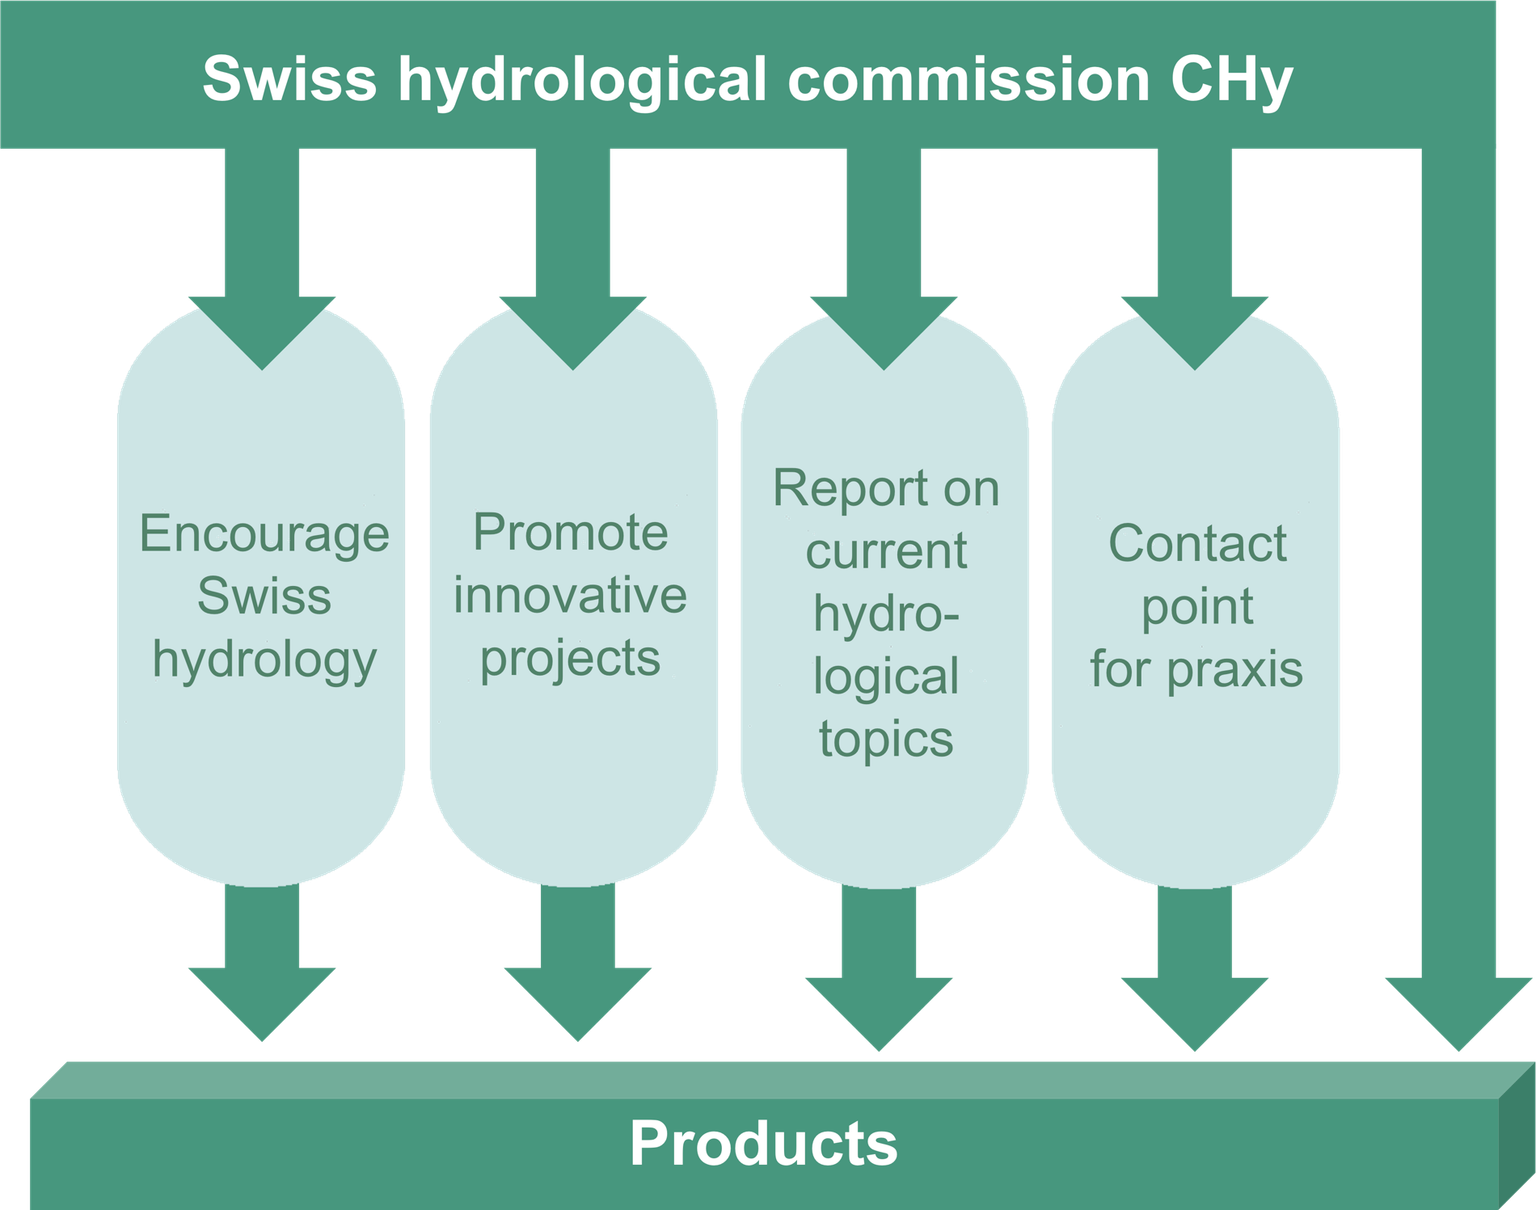 Four pillars of the activities of the Swiss Hydrological Commission